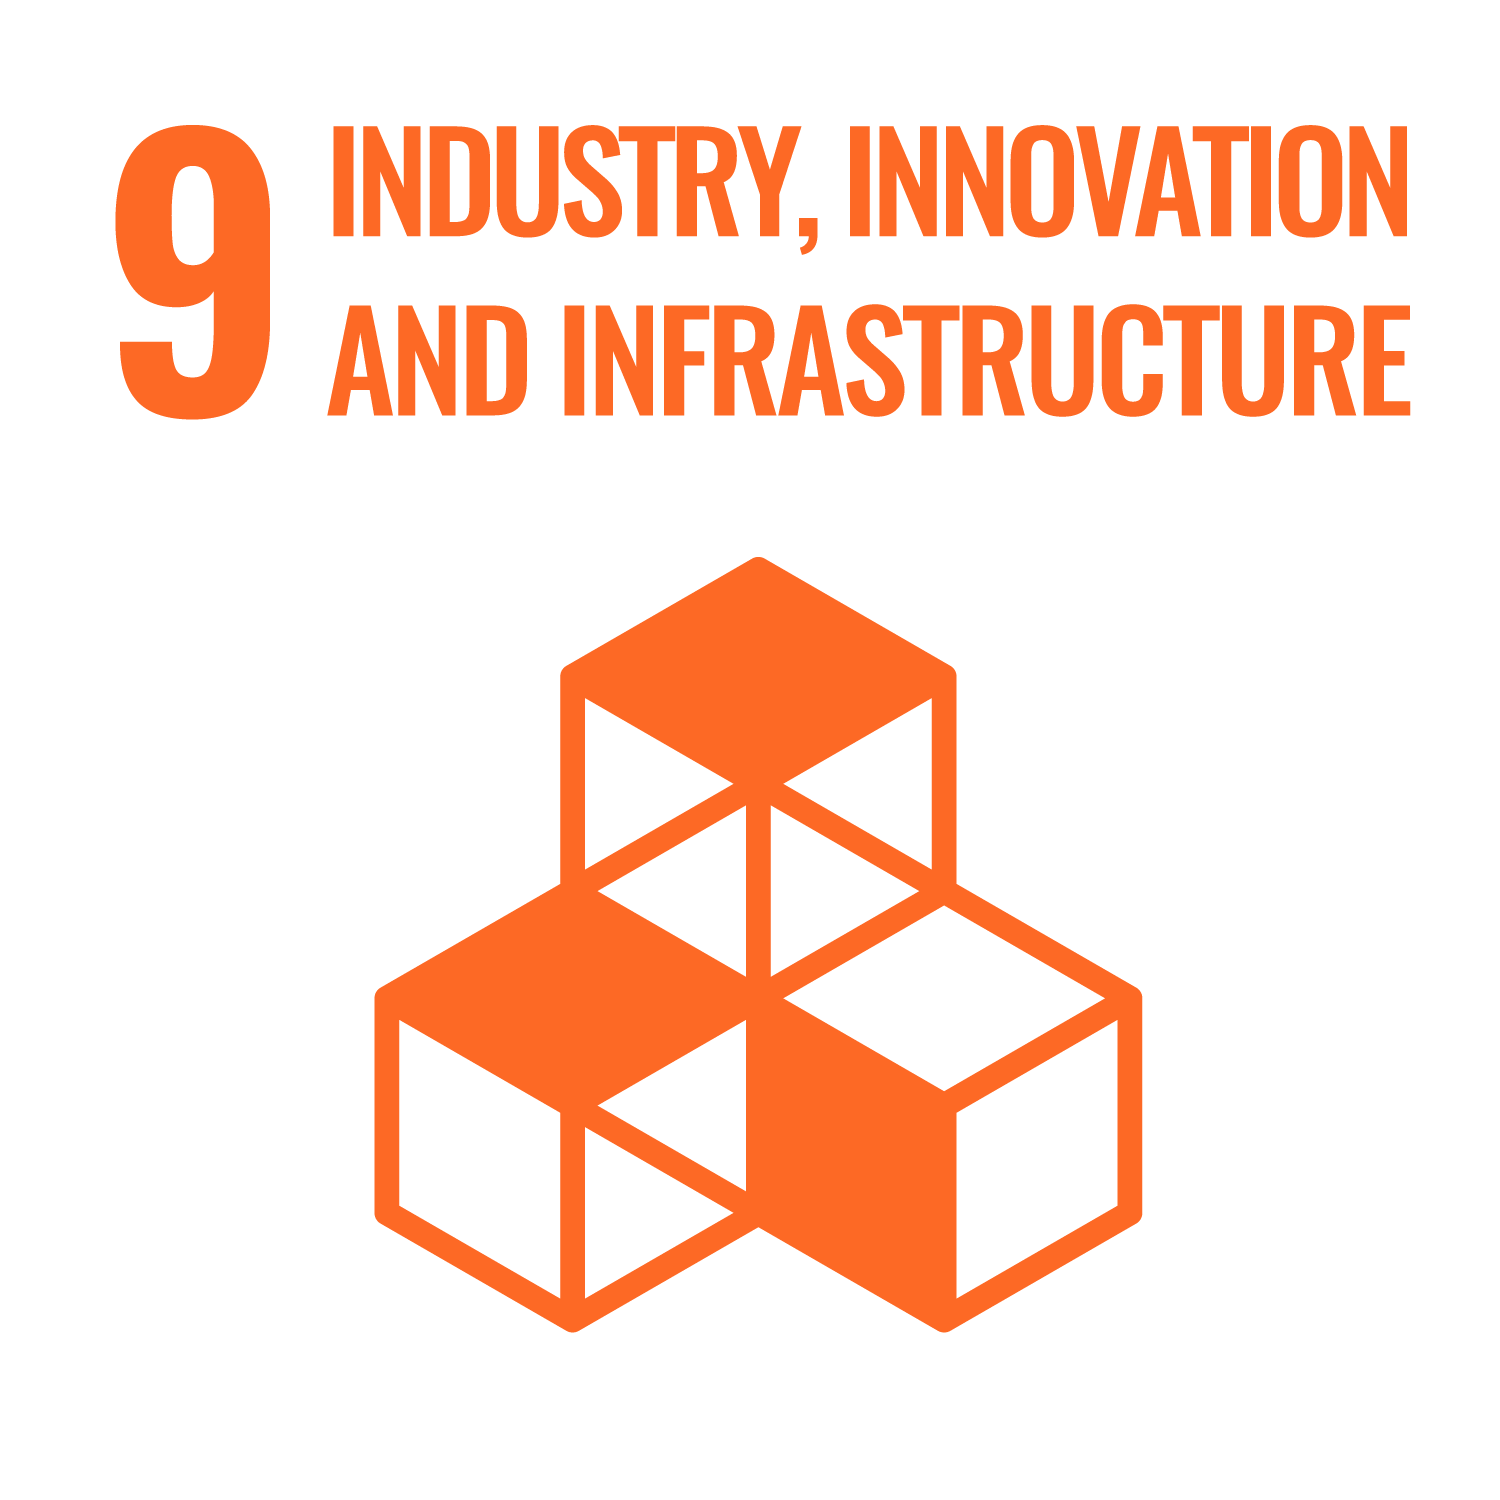 Industry, innovation and infrastructure - Goal 9